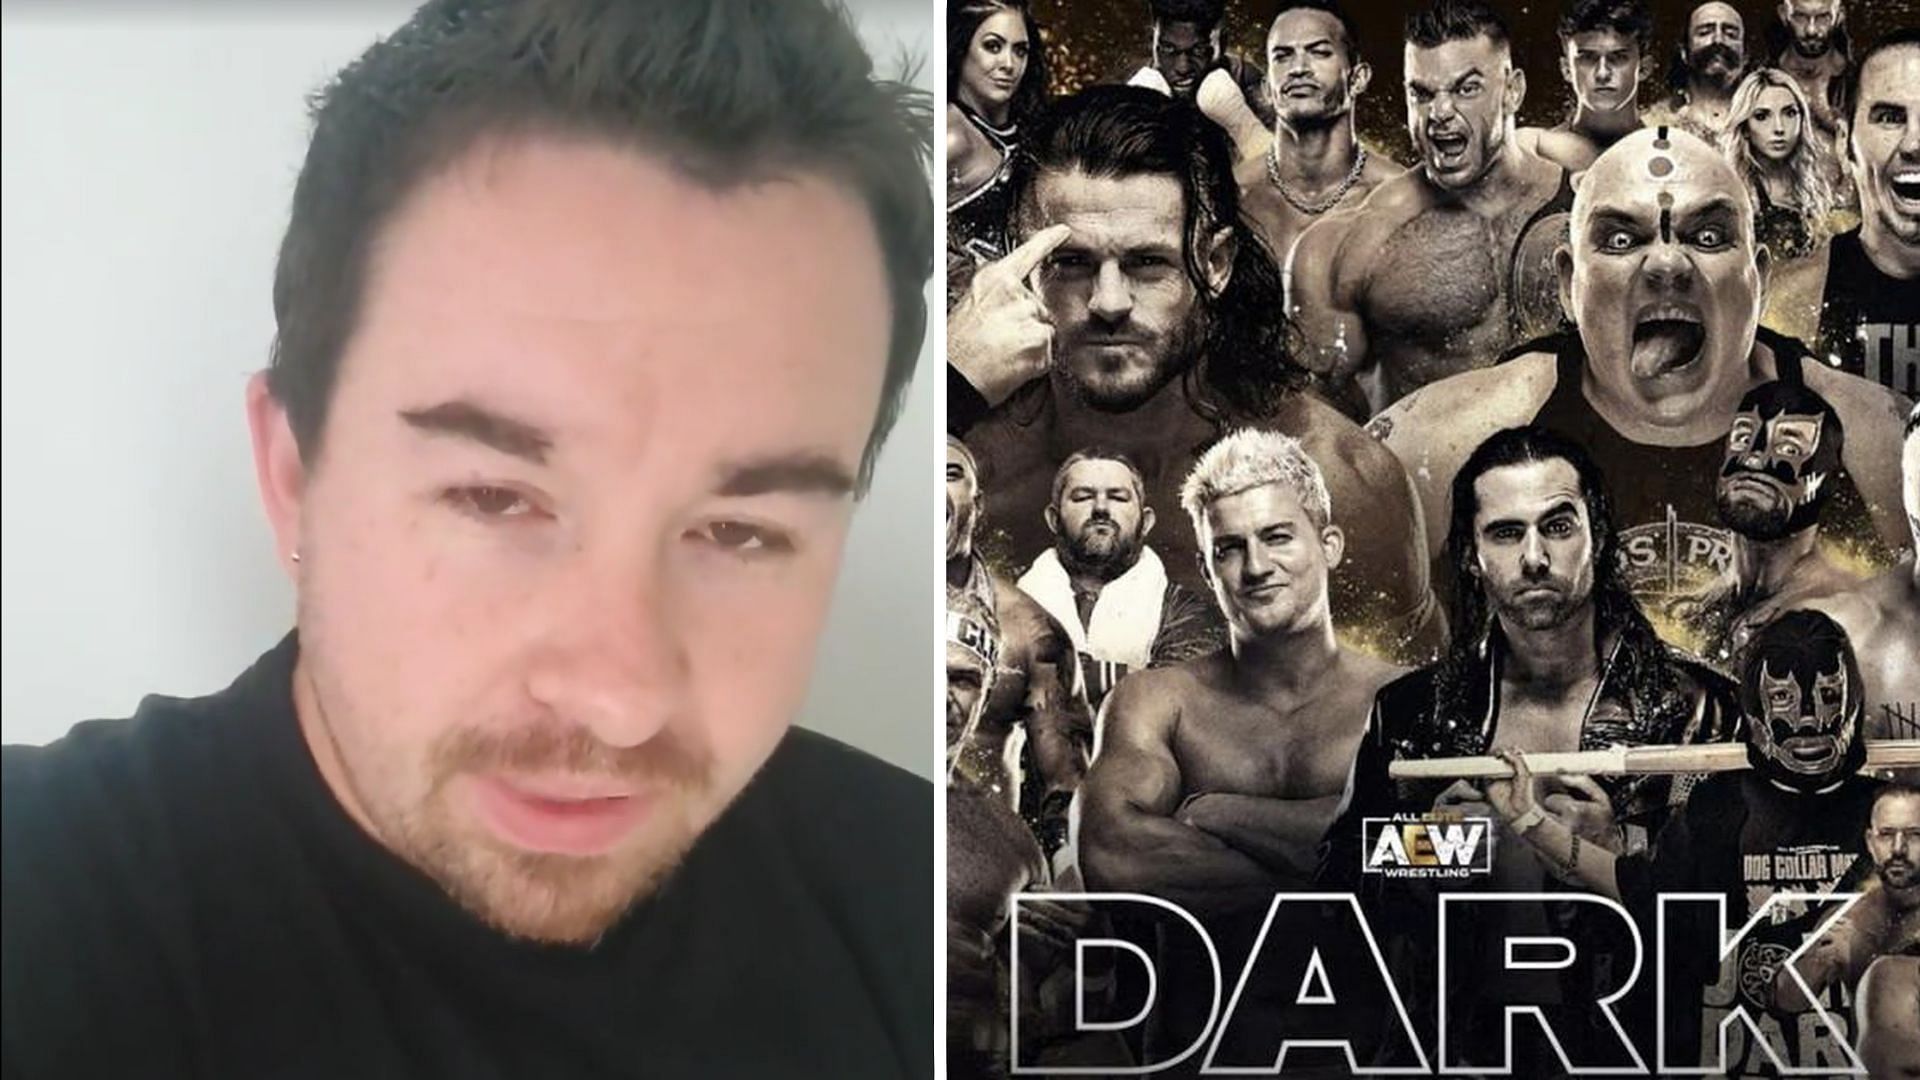 An AEW debutant is seemingly already in troubled waters